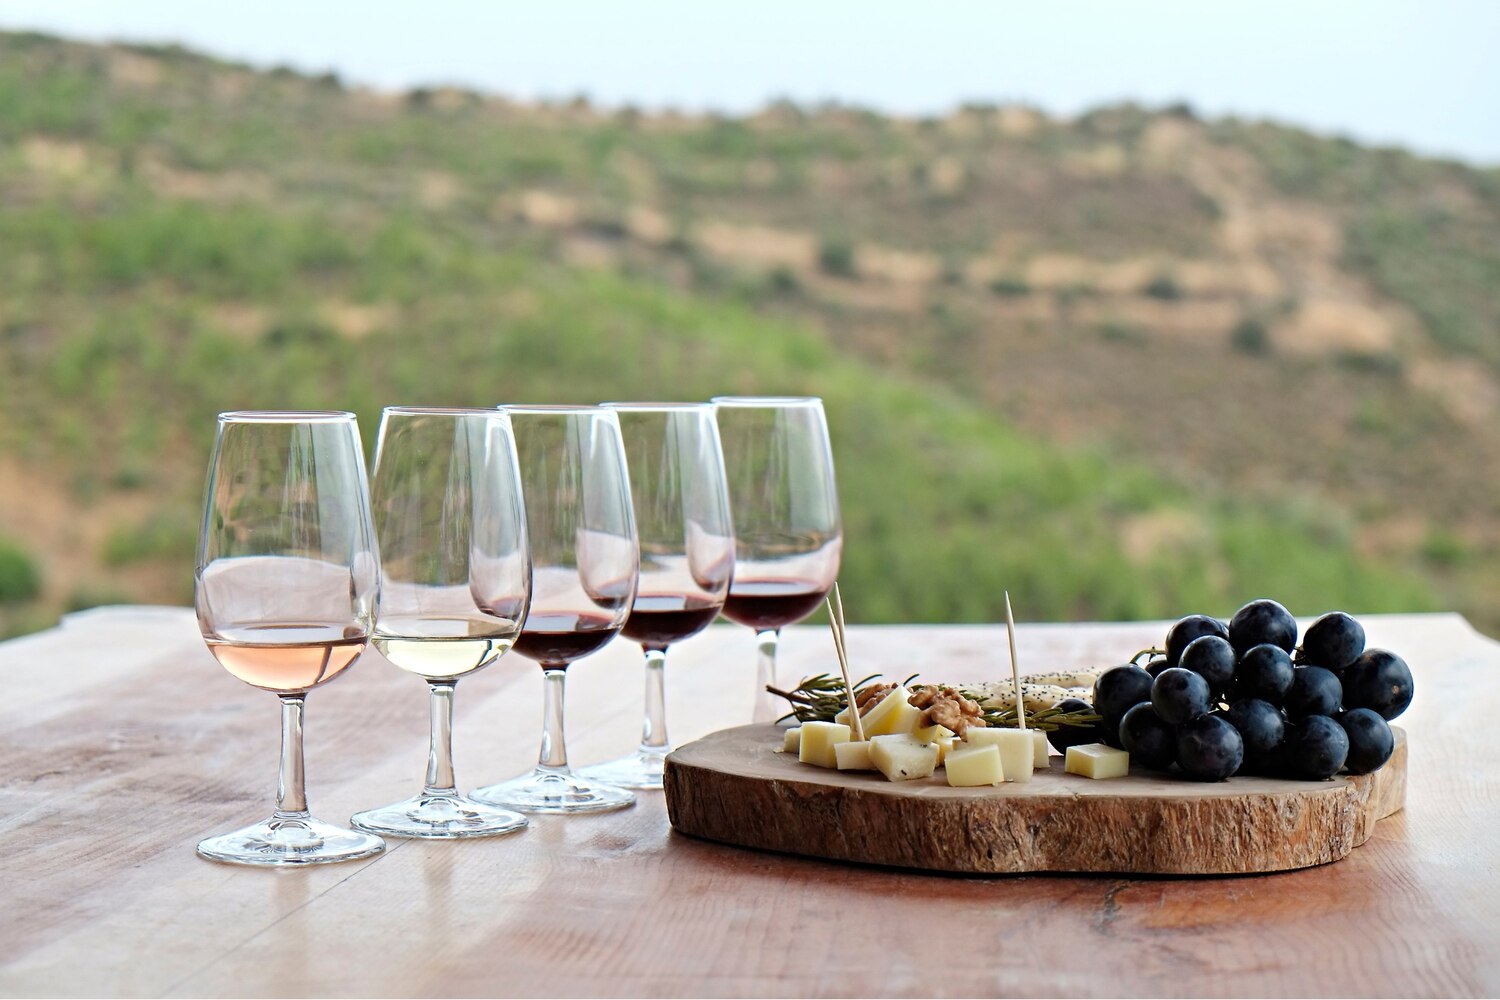 A spread of wine glasses and a cheese platter set outdoors with a vineyard and Tuscan rolling hills in the background.